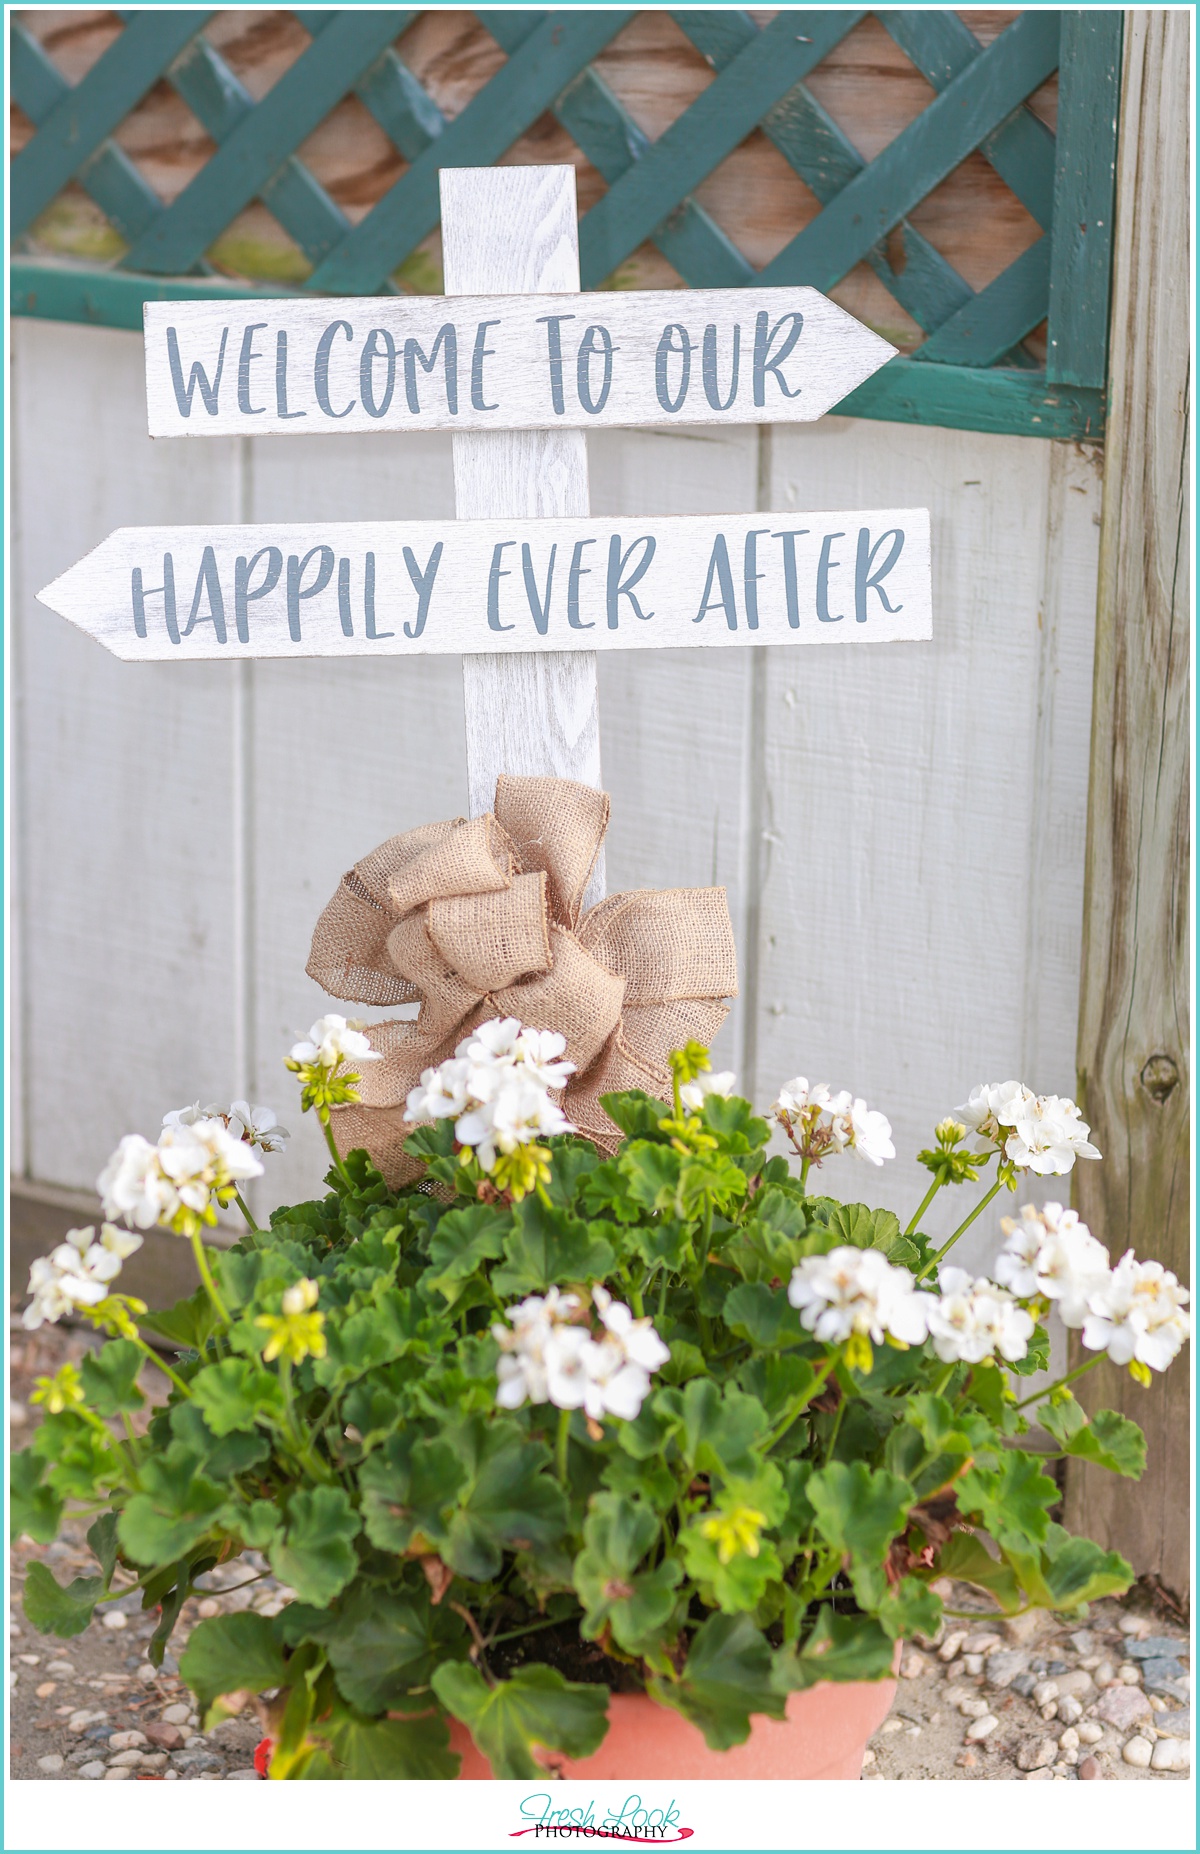 Welcome to our happily ever after